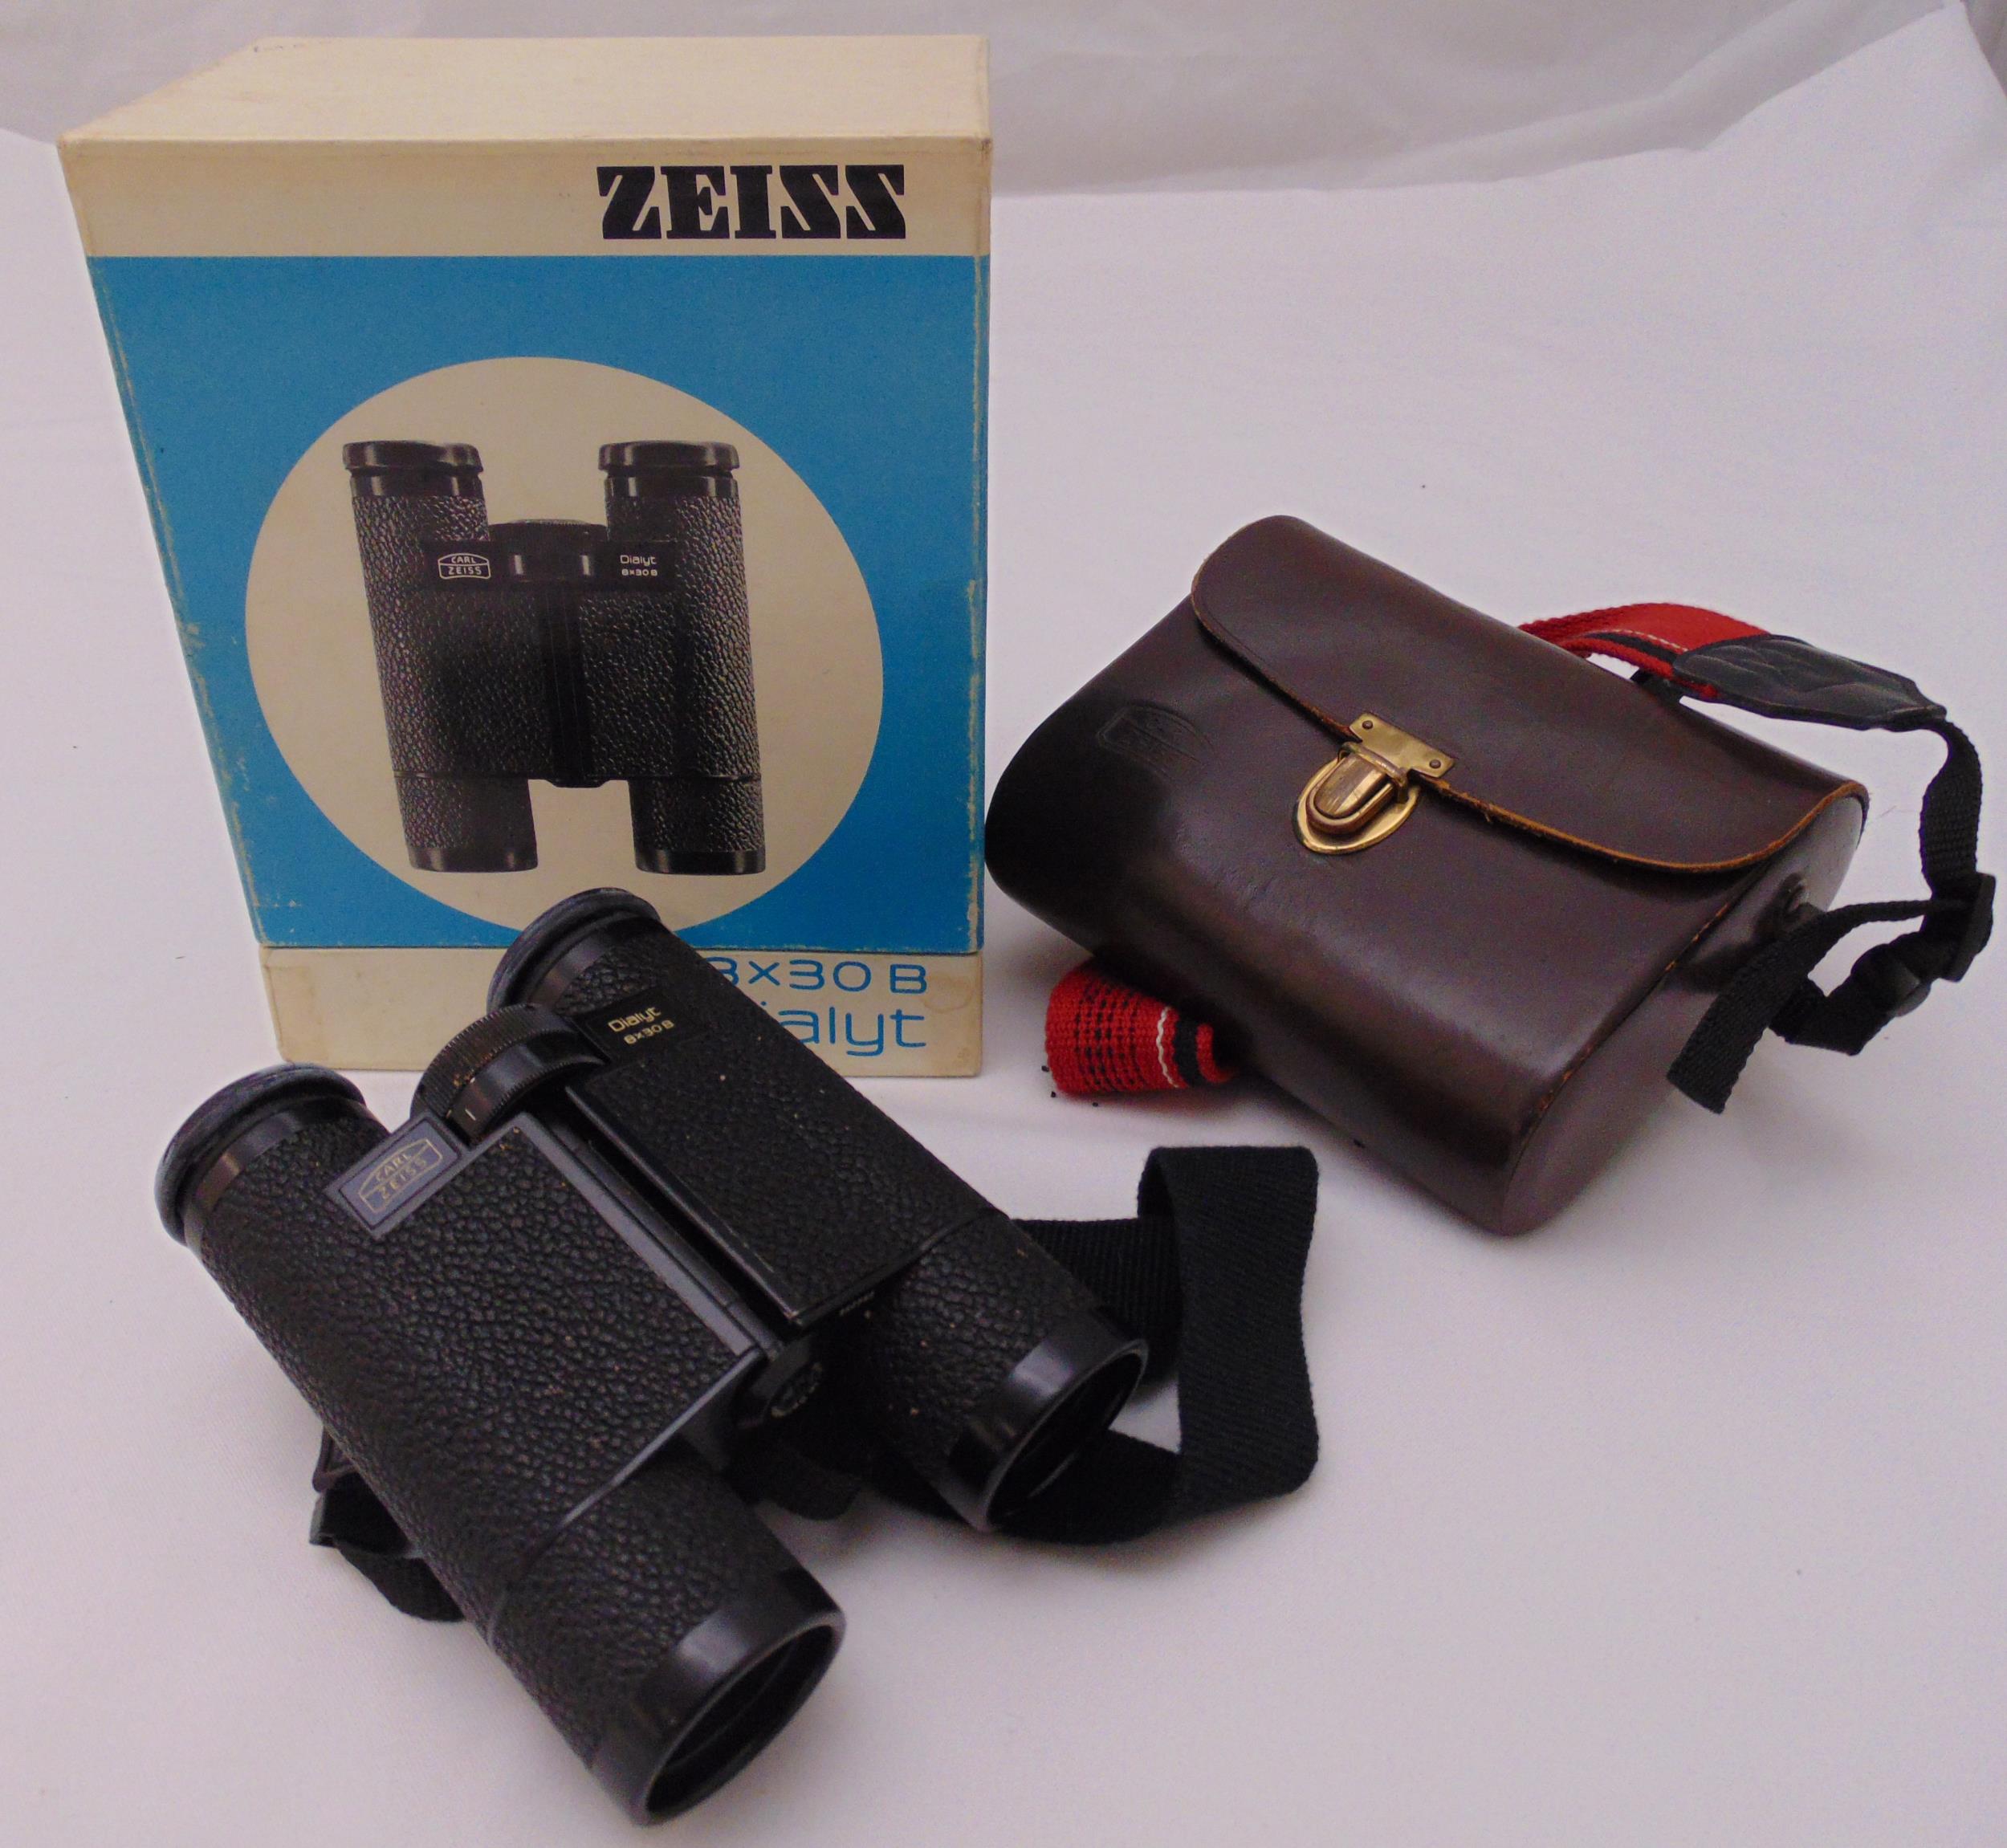 Zeiss 8 x 30 Dialyt binoculars in fitted leather case to include original packaging